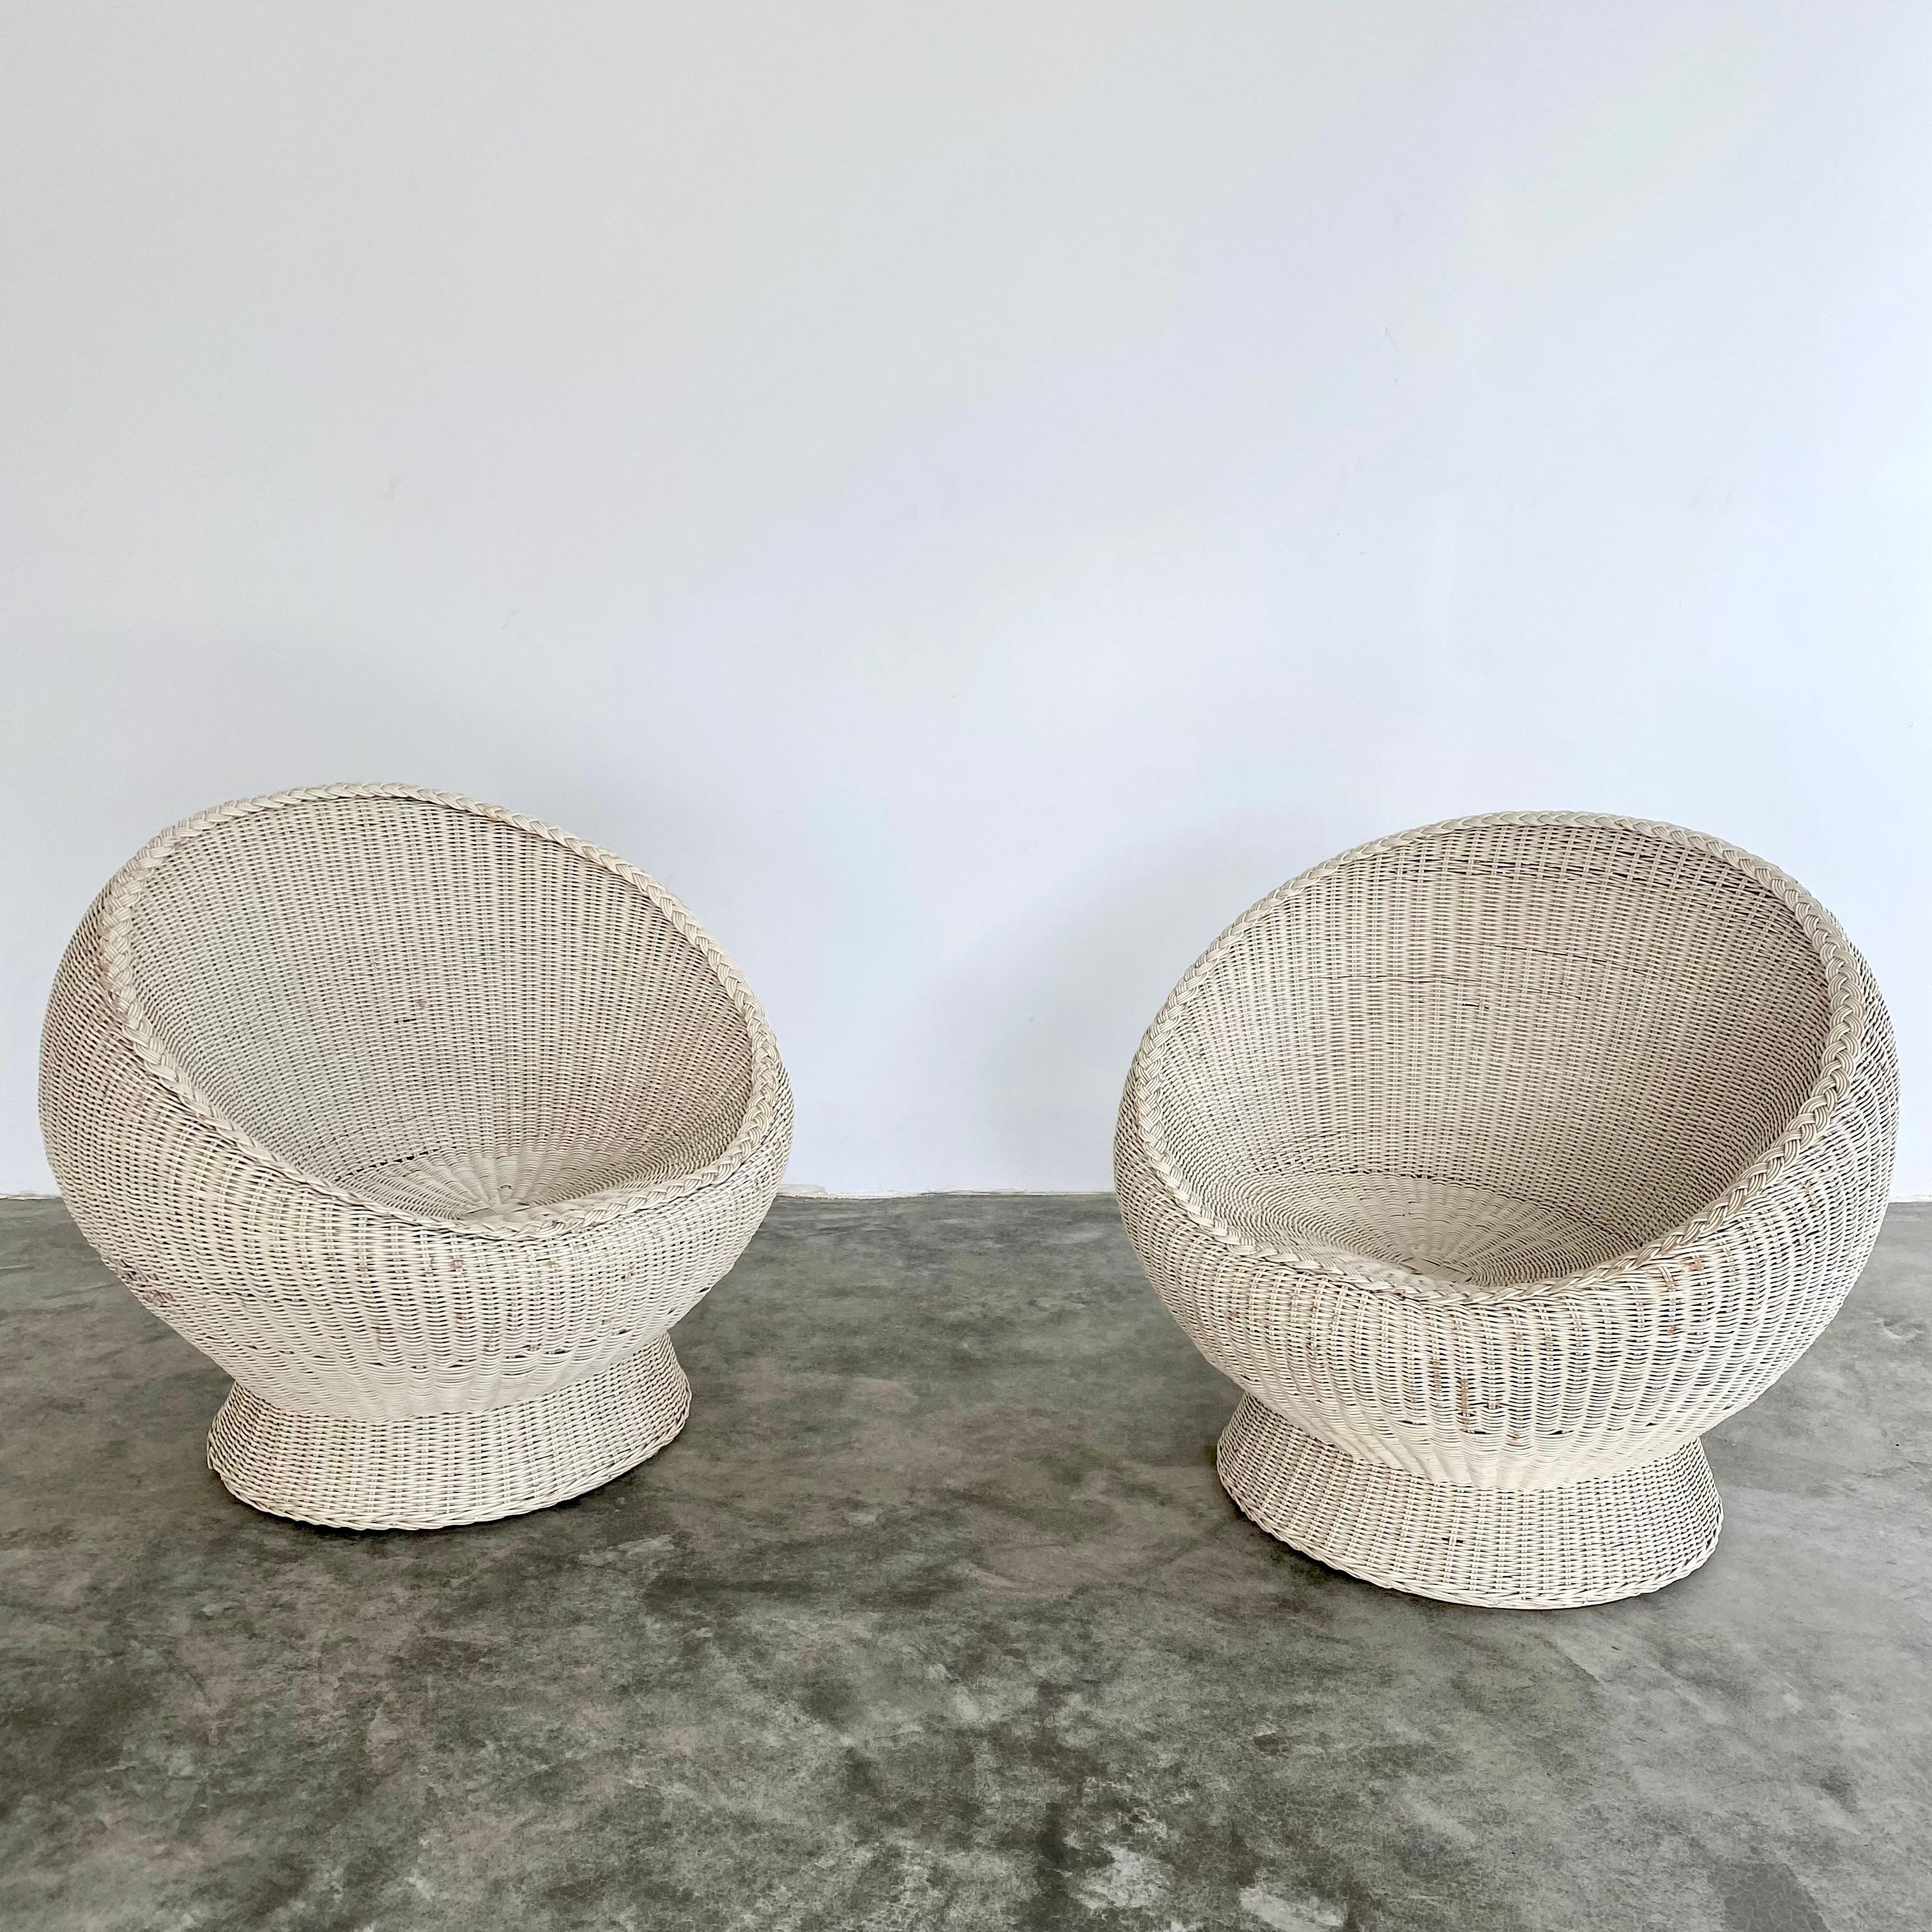 Sculptural pair of French wicker chairs. Circa 1960s. Featuring a woven white wicker frame and braided outline. Great unusual shape. Good vintage condition. Wear as shown.